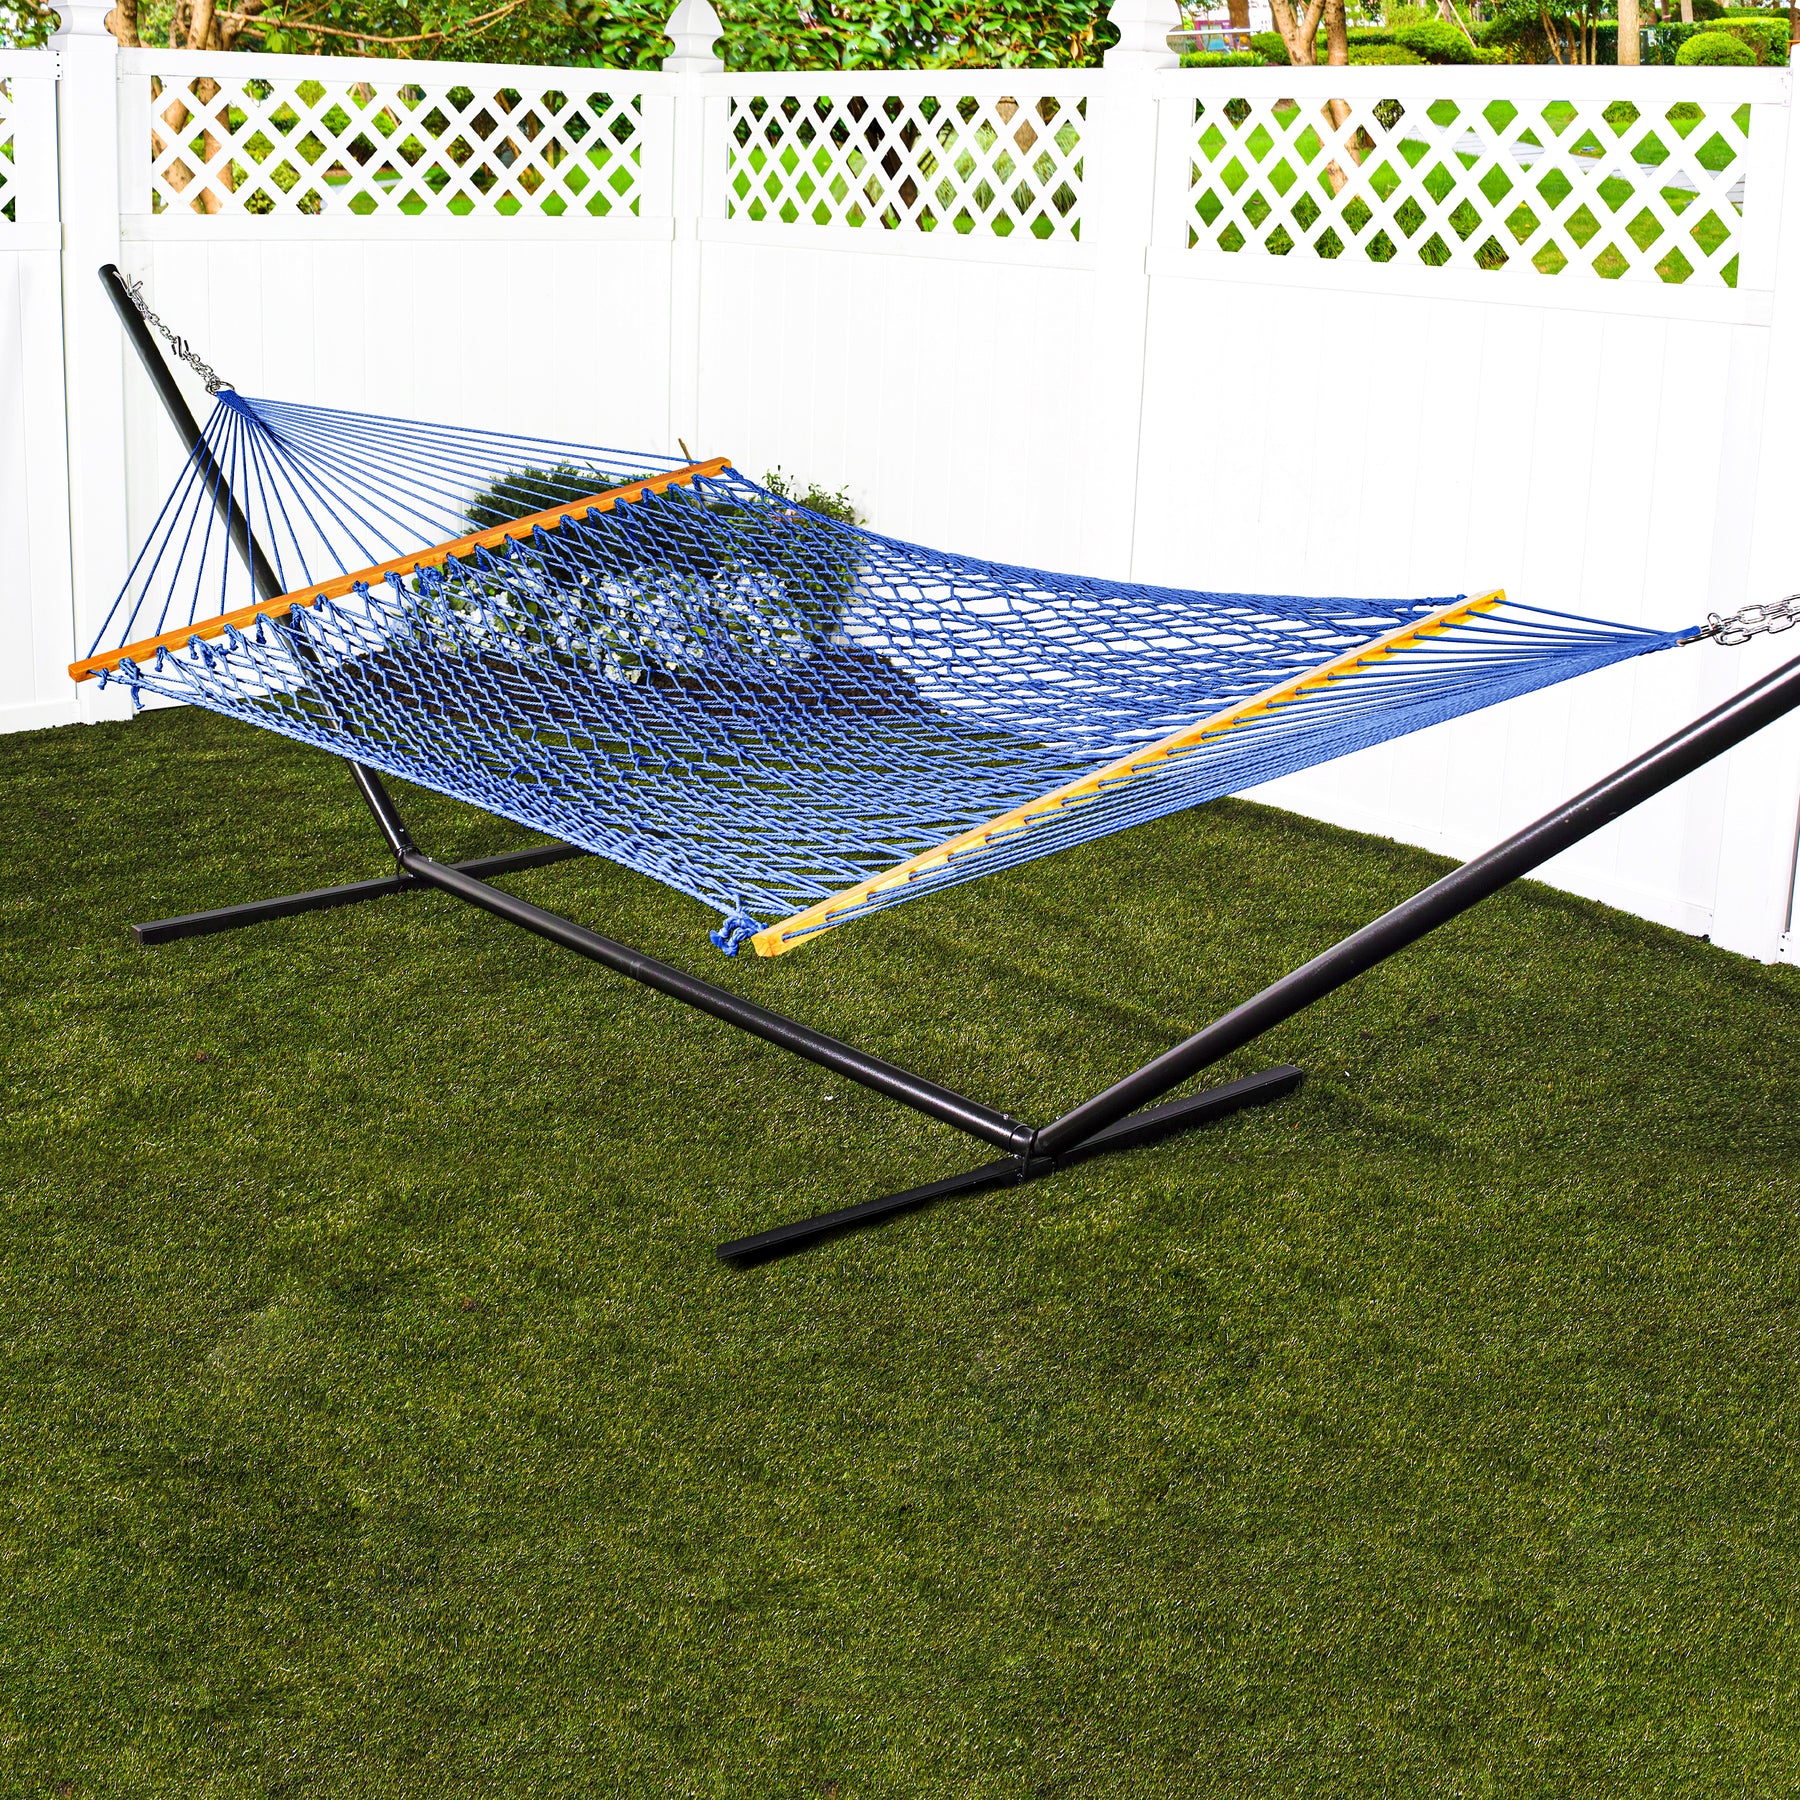 Blue variation of Bliss Hammocks 60-inch Wide Cotton Rope Hammock with a stand outside in the lawn near a fence.